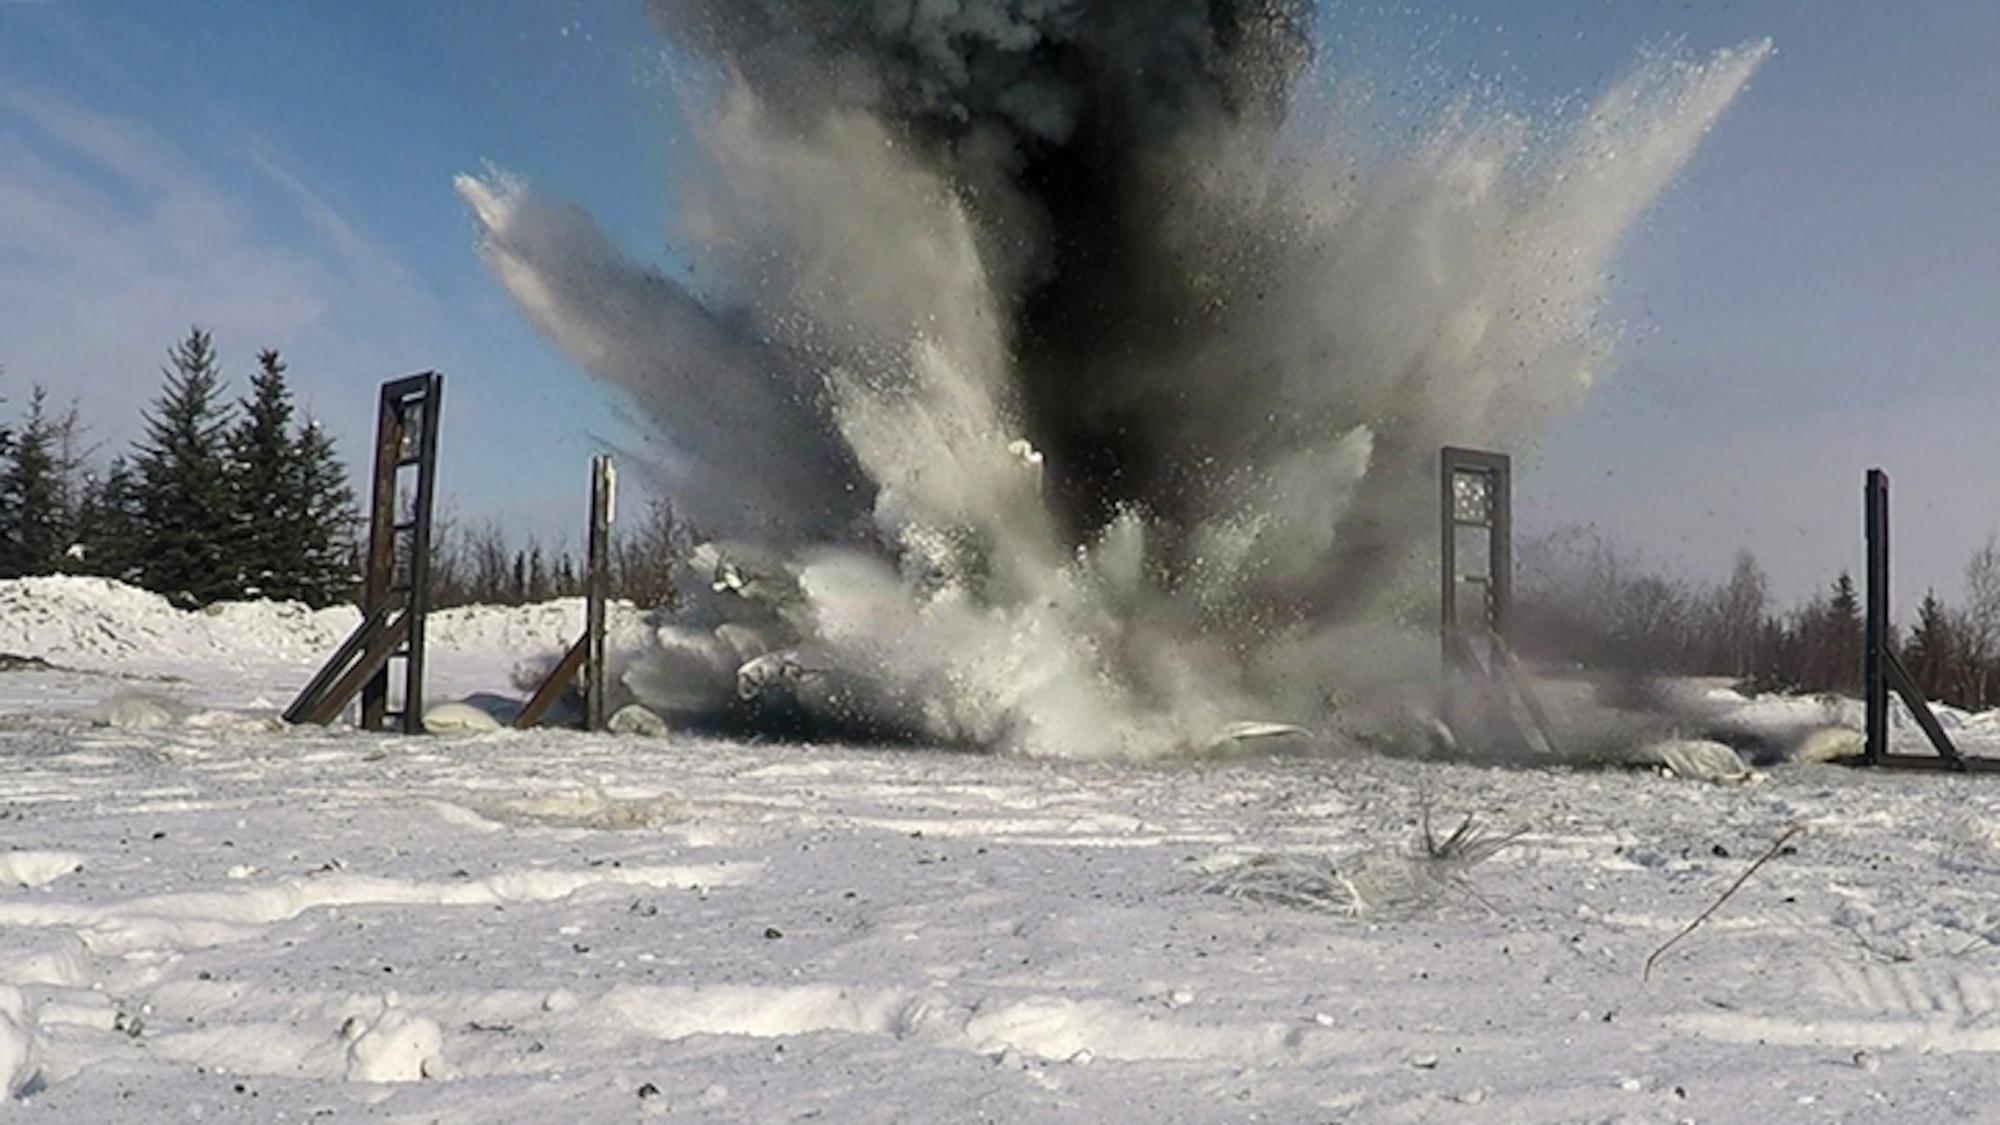 U.S. Air Force Airmen from the 354th Civil Engineer Squadron Explosive Ordnance Disposal (EOD) flight, the Iceman Spark Innovation team, Air Force Reach Laboratory innovation team, and other partners set off an explosion for the EOD snow mitigation test on March 18, 2021, at Eielson Air Force Base, Alaska. The experiment tested the use of snow to mitigate the damaging effects of explosions in an arctic environment. (U.S. Air Force photo/Senior Airman Danielle Sukhlall)